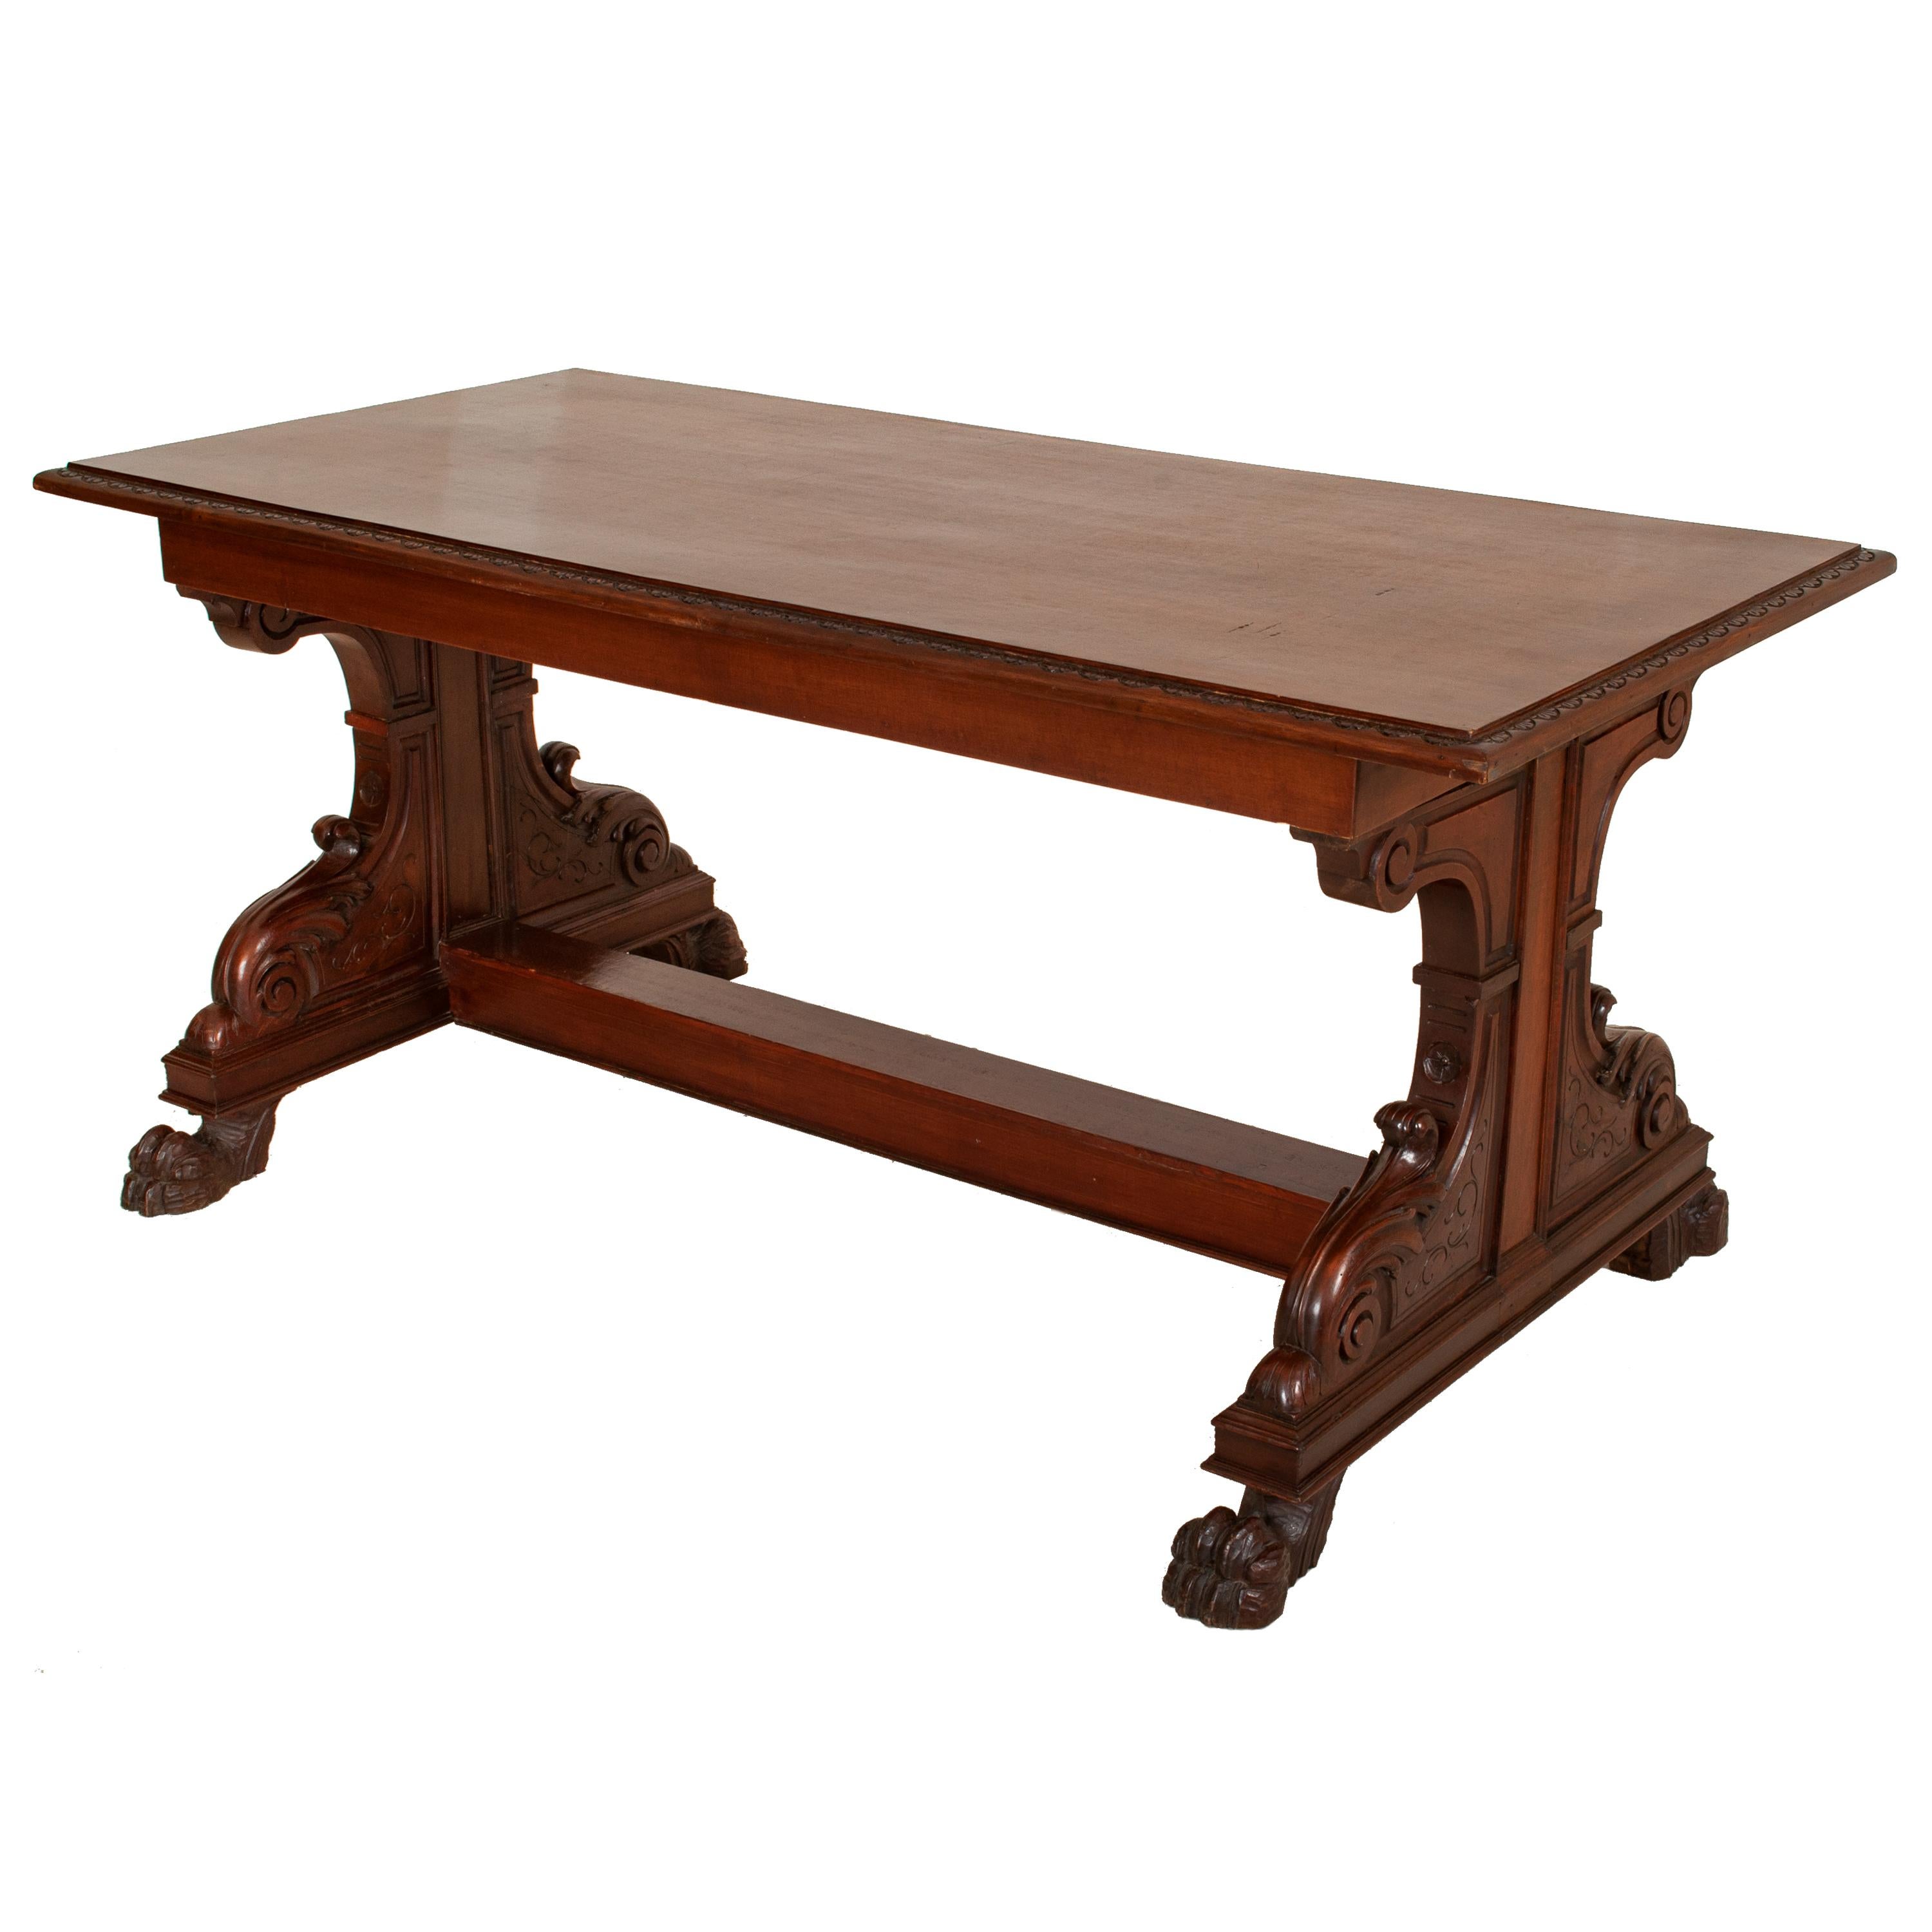 Late 19th Century Antique Italian Carved Walnut Renaissance Revival Library Serving Table, 1870 For Sale